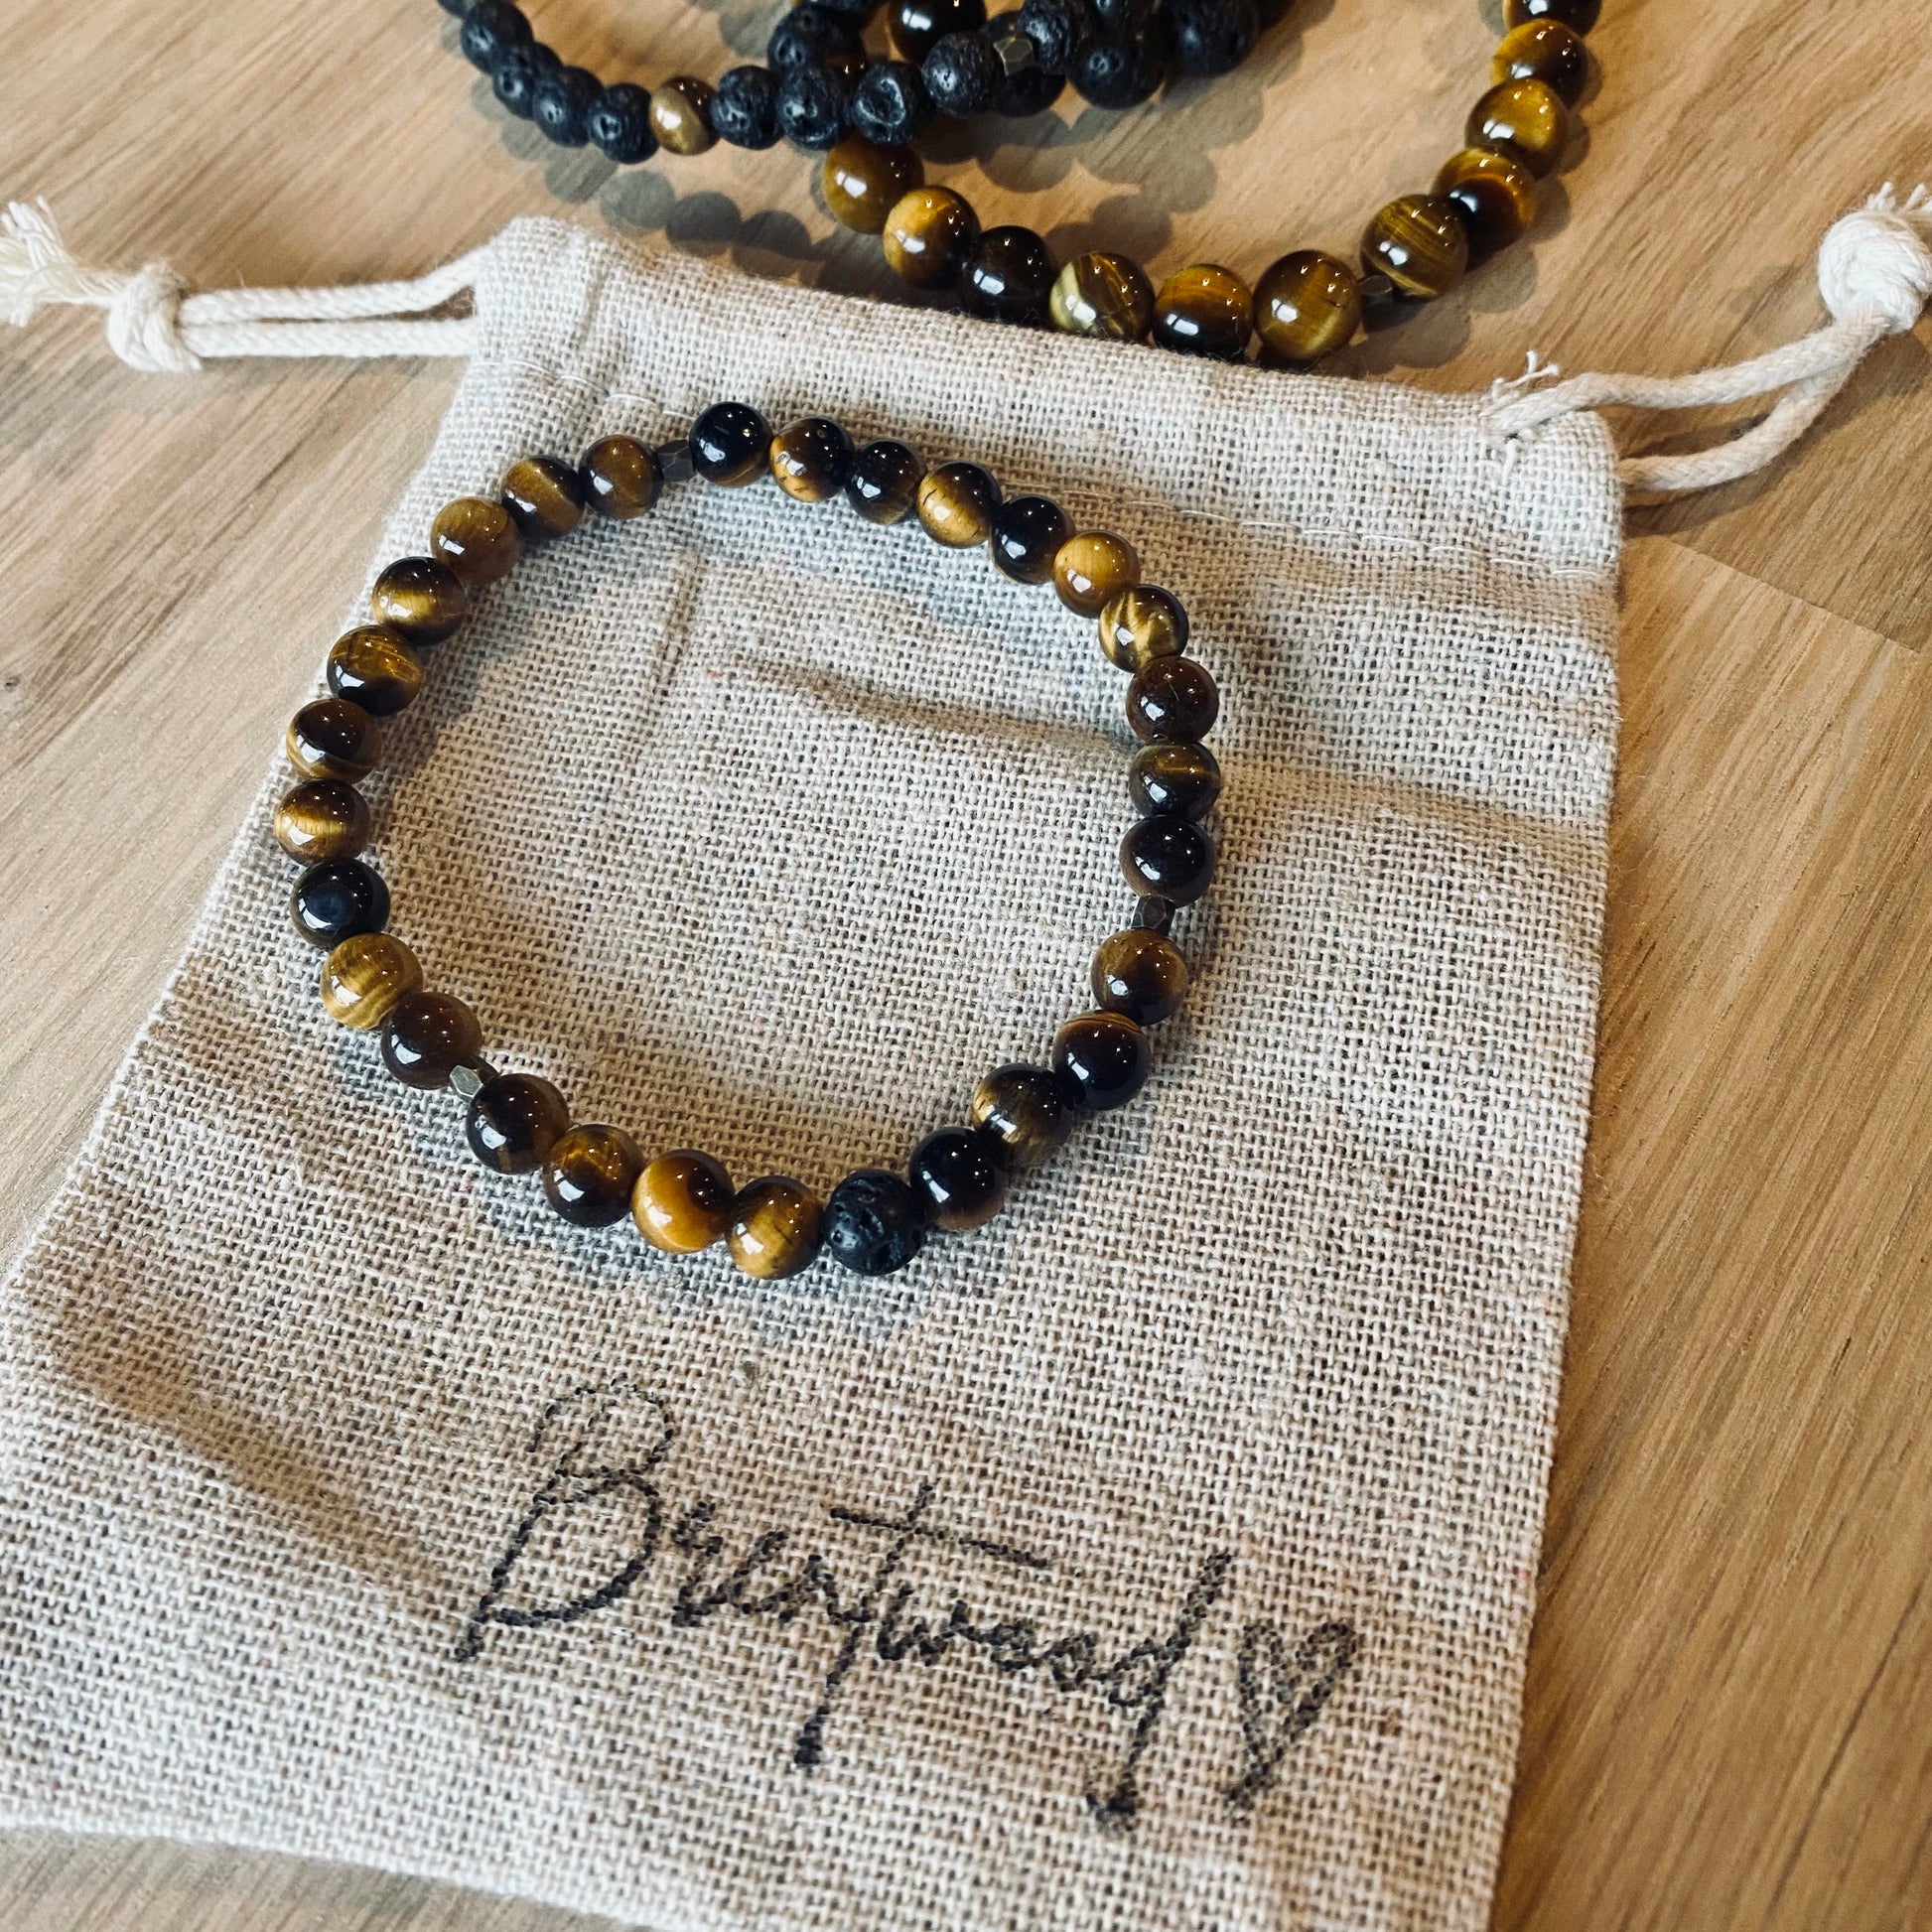 Tiger Eye 6 Aroma Bracelet - 6mm beaded diffuser bracelet made from natural tiger eye gemstone & a single black lava stone bead with antiqued gold faceted embellishments. Laid on cloth pouch/drawstring bag stamped with “Brentwood” and a heart.